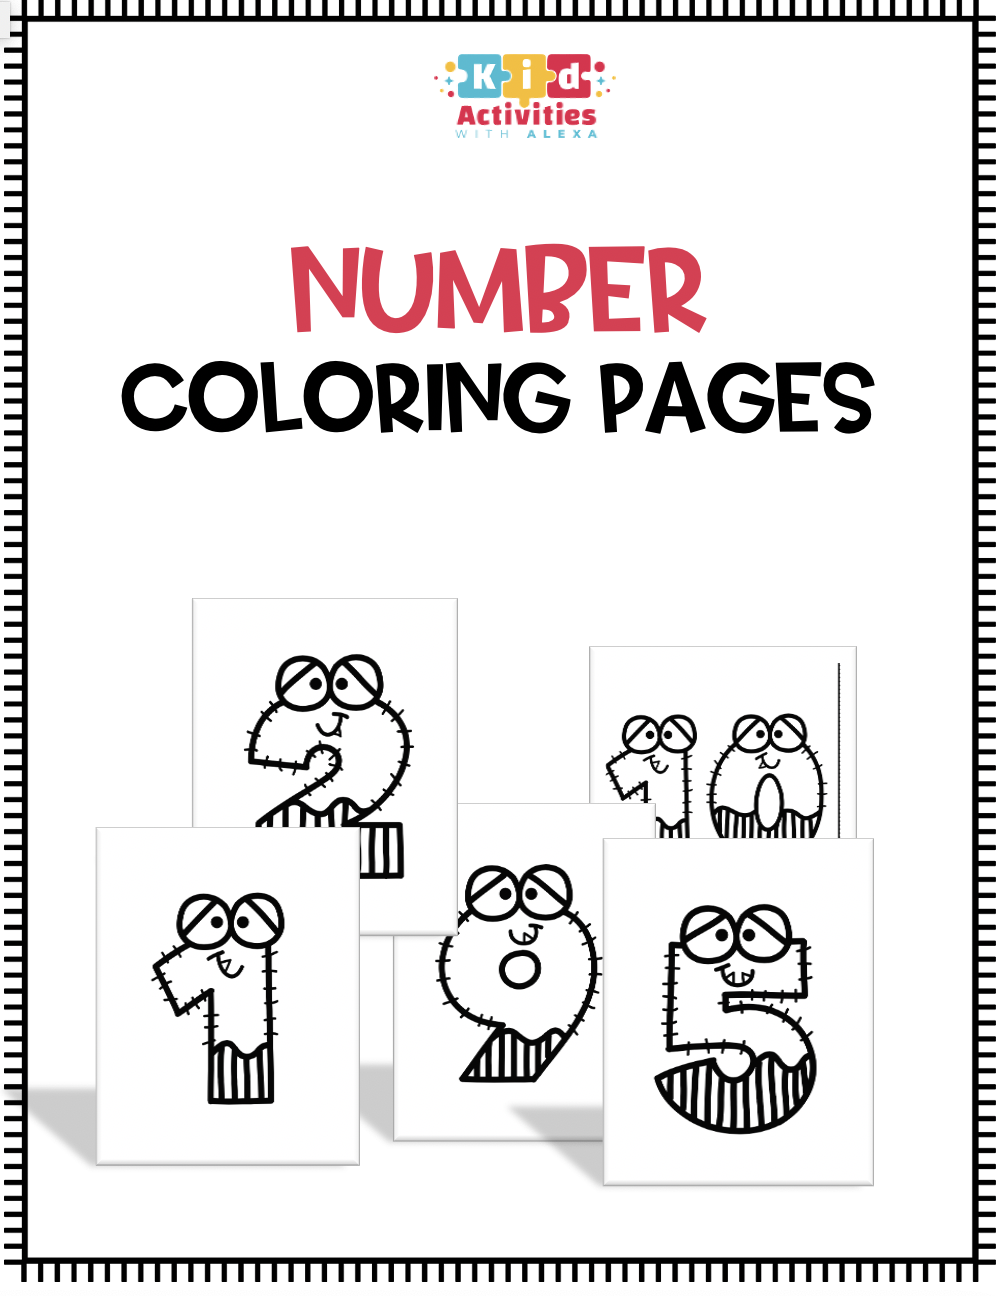 Learn Numbers With Coloring Pages Kid Activities With Alexa